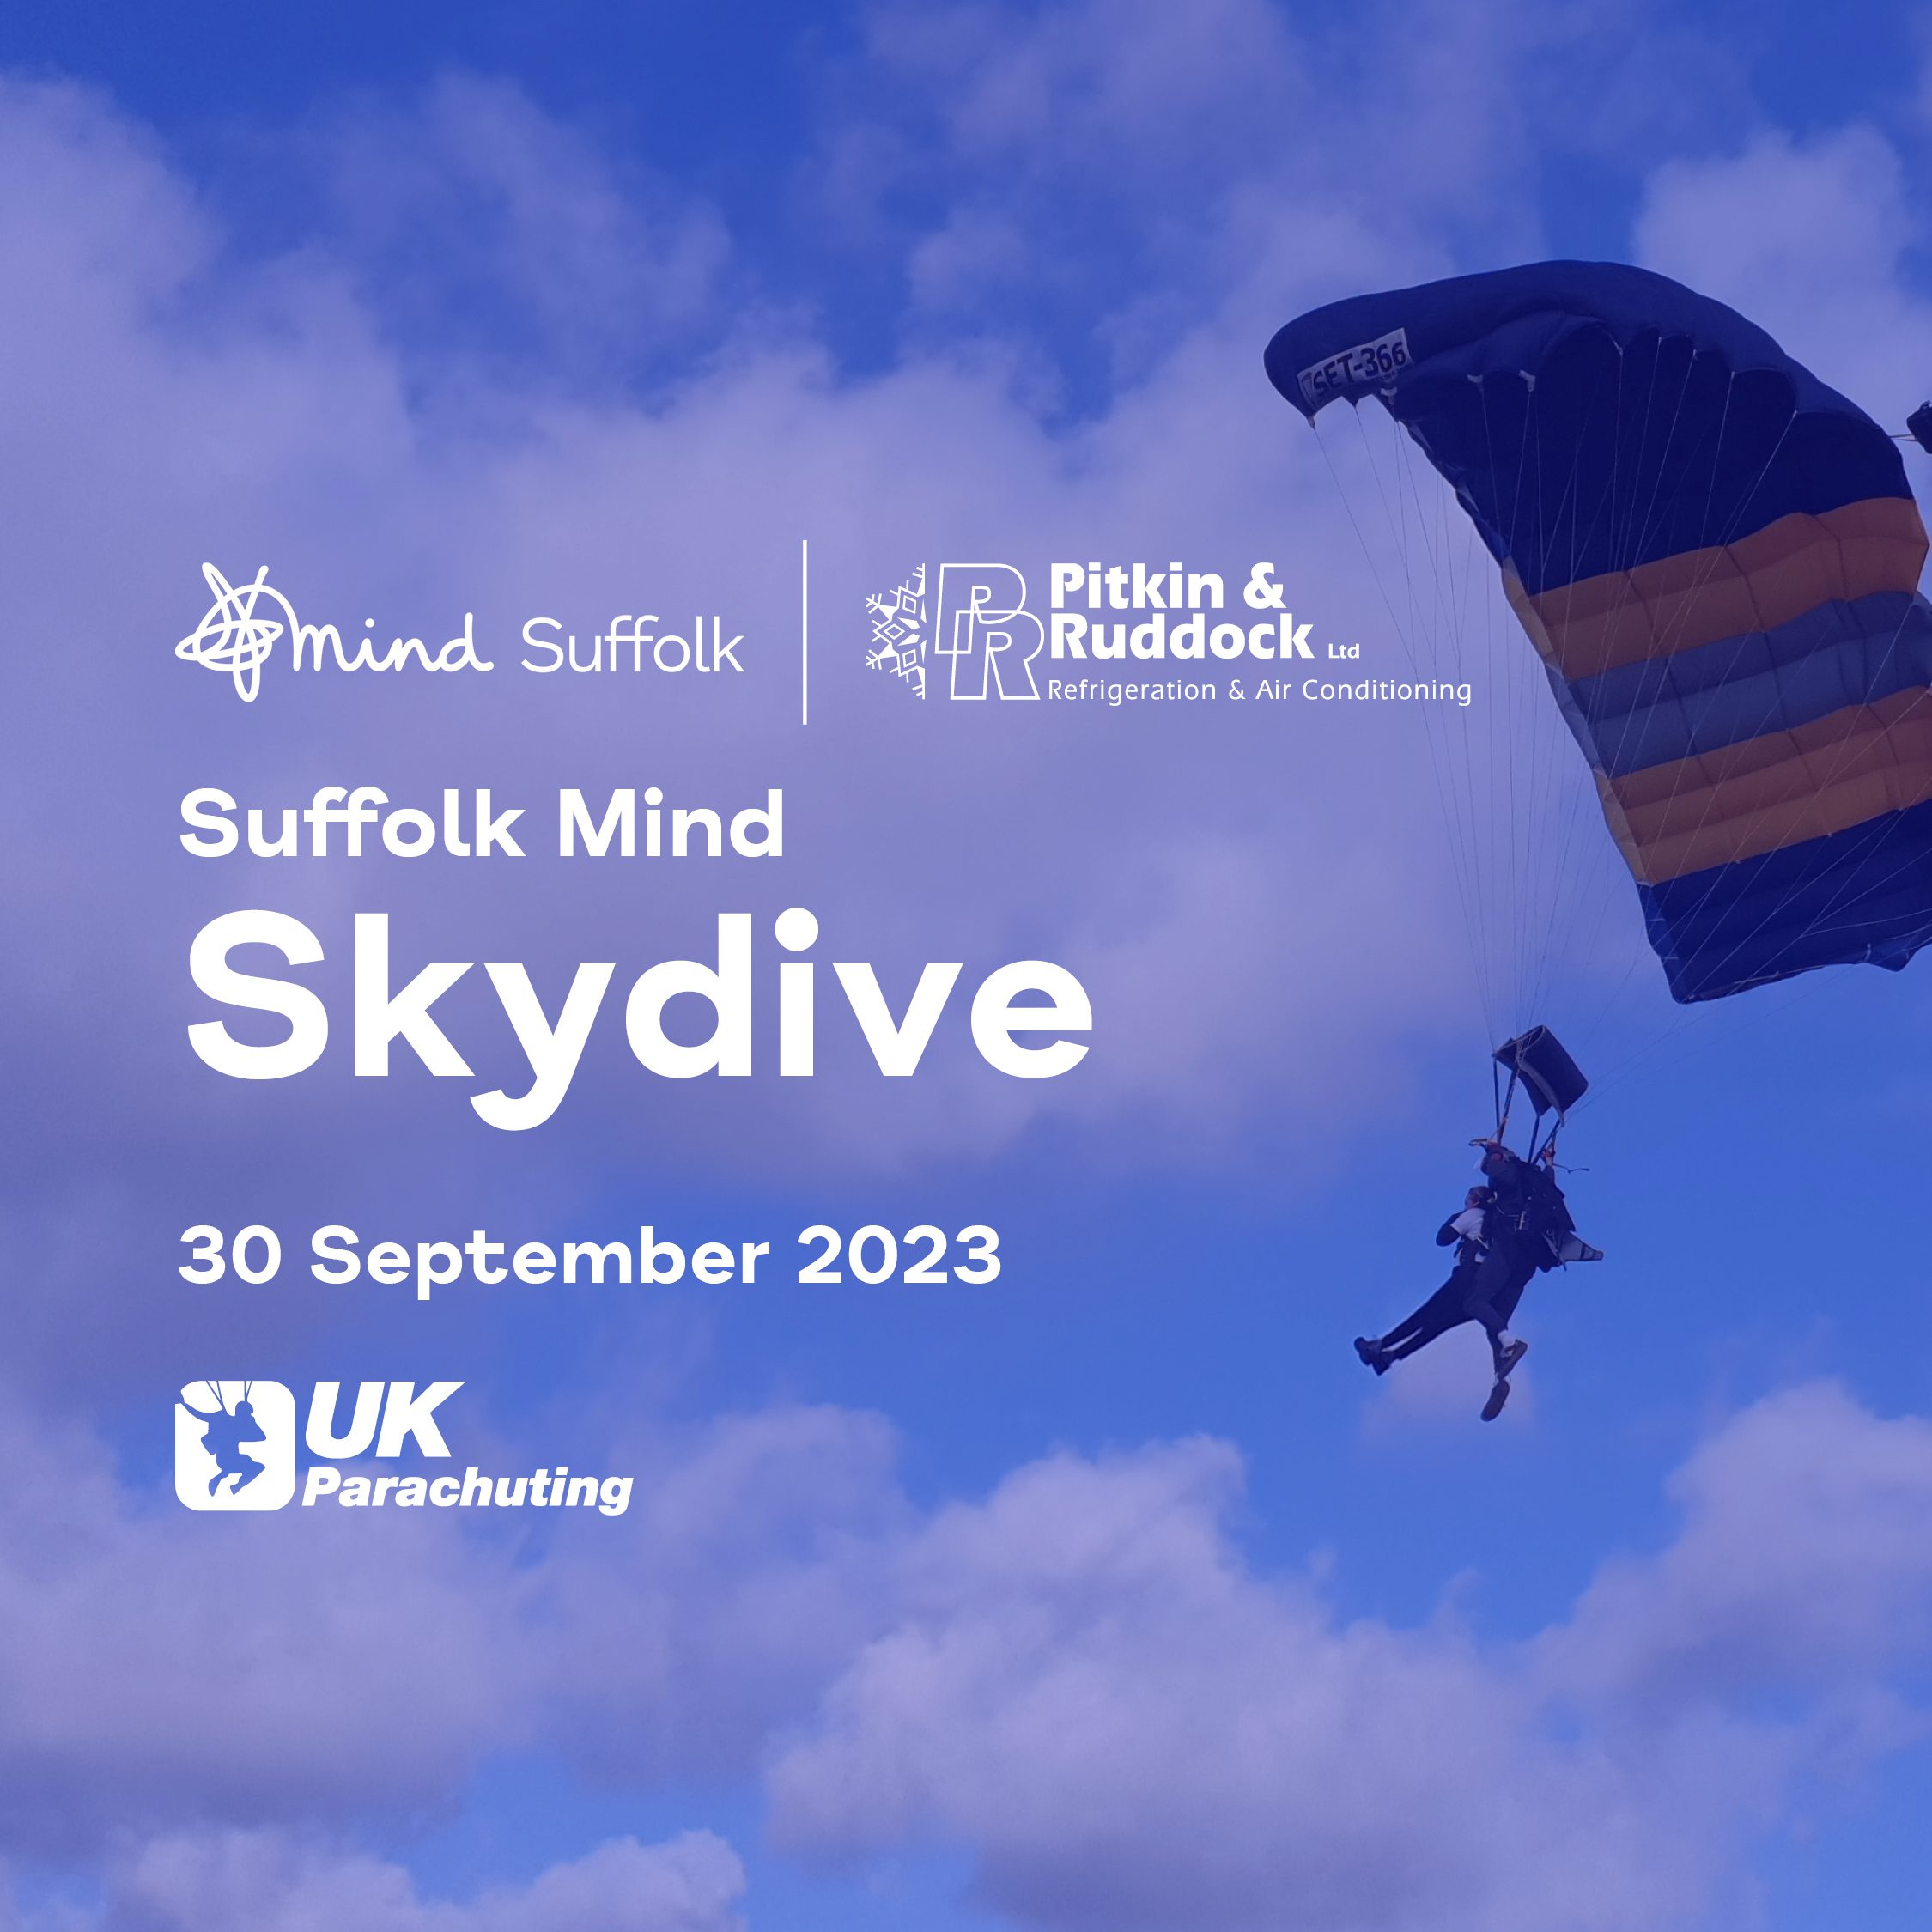 Person skydiving with the words Suffolk Mind Skydive 30 September 2023 over clouds and sky